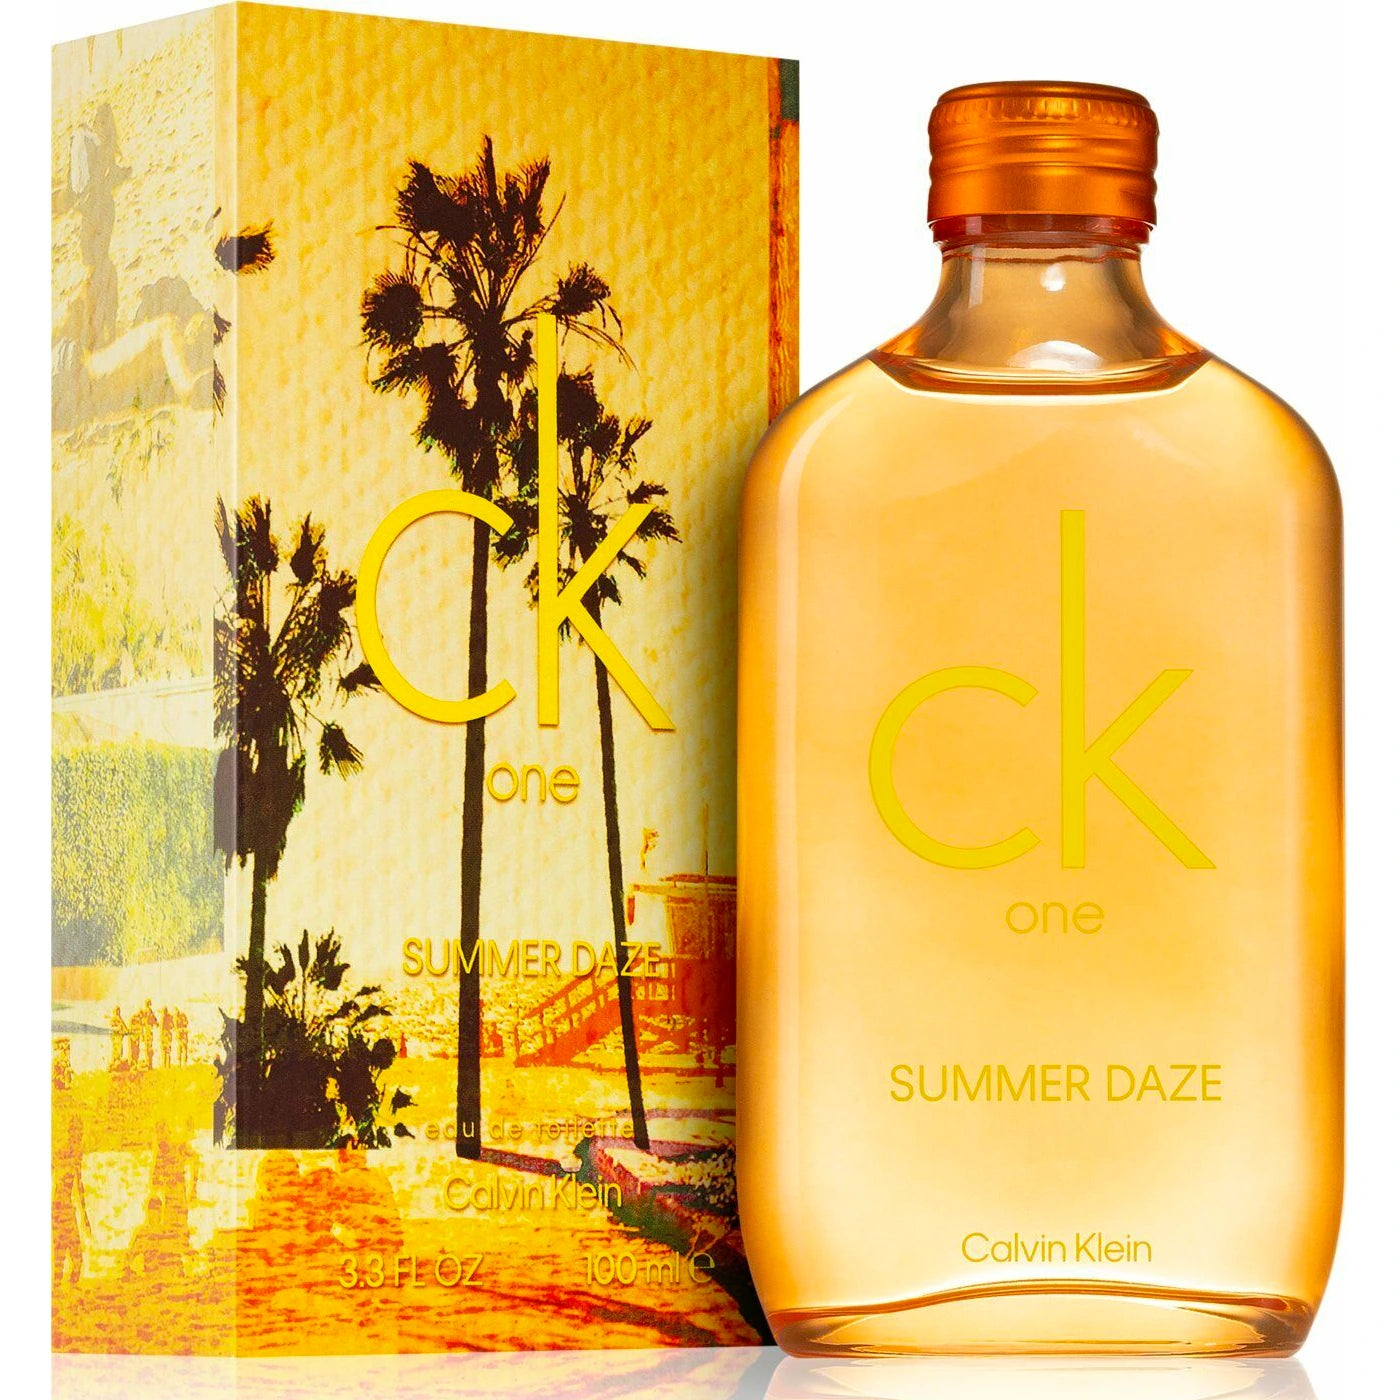 <p><b data-mce-fragment="1">Ck One Summer Daze</b><span data-mce-fragment="1"> by </span><b data-mce-fragment="1">Calvin Klein</b><span data-mce-fragment="1"> is a fragrance for women and men. This is a new fragrance. </span><b data-mce-fragment="1">Ck One Summer Daze</b><span data-mce-fragment="1"> was launched in 2022. Top note is Kumquat; middle notes are Mint and Tea; base notes are White Musk and Vetiver.</span></p>
<p>"CK One Summer Daze is inspired by the ultimate road trip with your tribe and the freedom felt on the open road. Beautiful landscapes. Passing road signs. A map filled with endless adventure. The arrival of summer awakens one’s innermost feelings of warmth, youth, and playfulness.</p>
<p>Bright and luminous, CK One Summer Daze opens with a zesty, citrusy top note of kumquat. An iced mint tea note at the heart lends freshness while musk and vetiver ground the juice, capturing the essence of the summer season in a bottle. The end result is a fragrance that provides a feeling of happiness.</p>